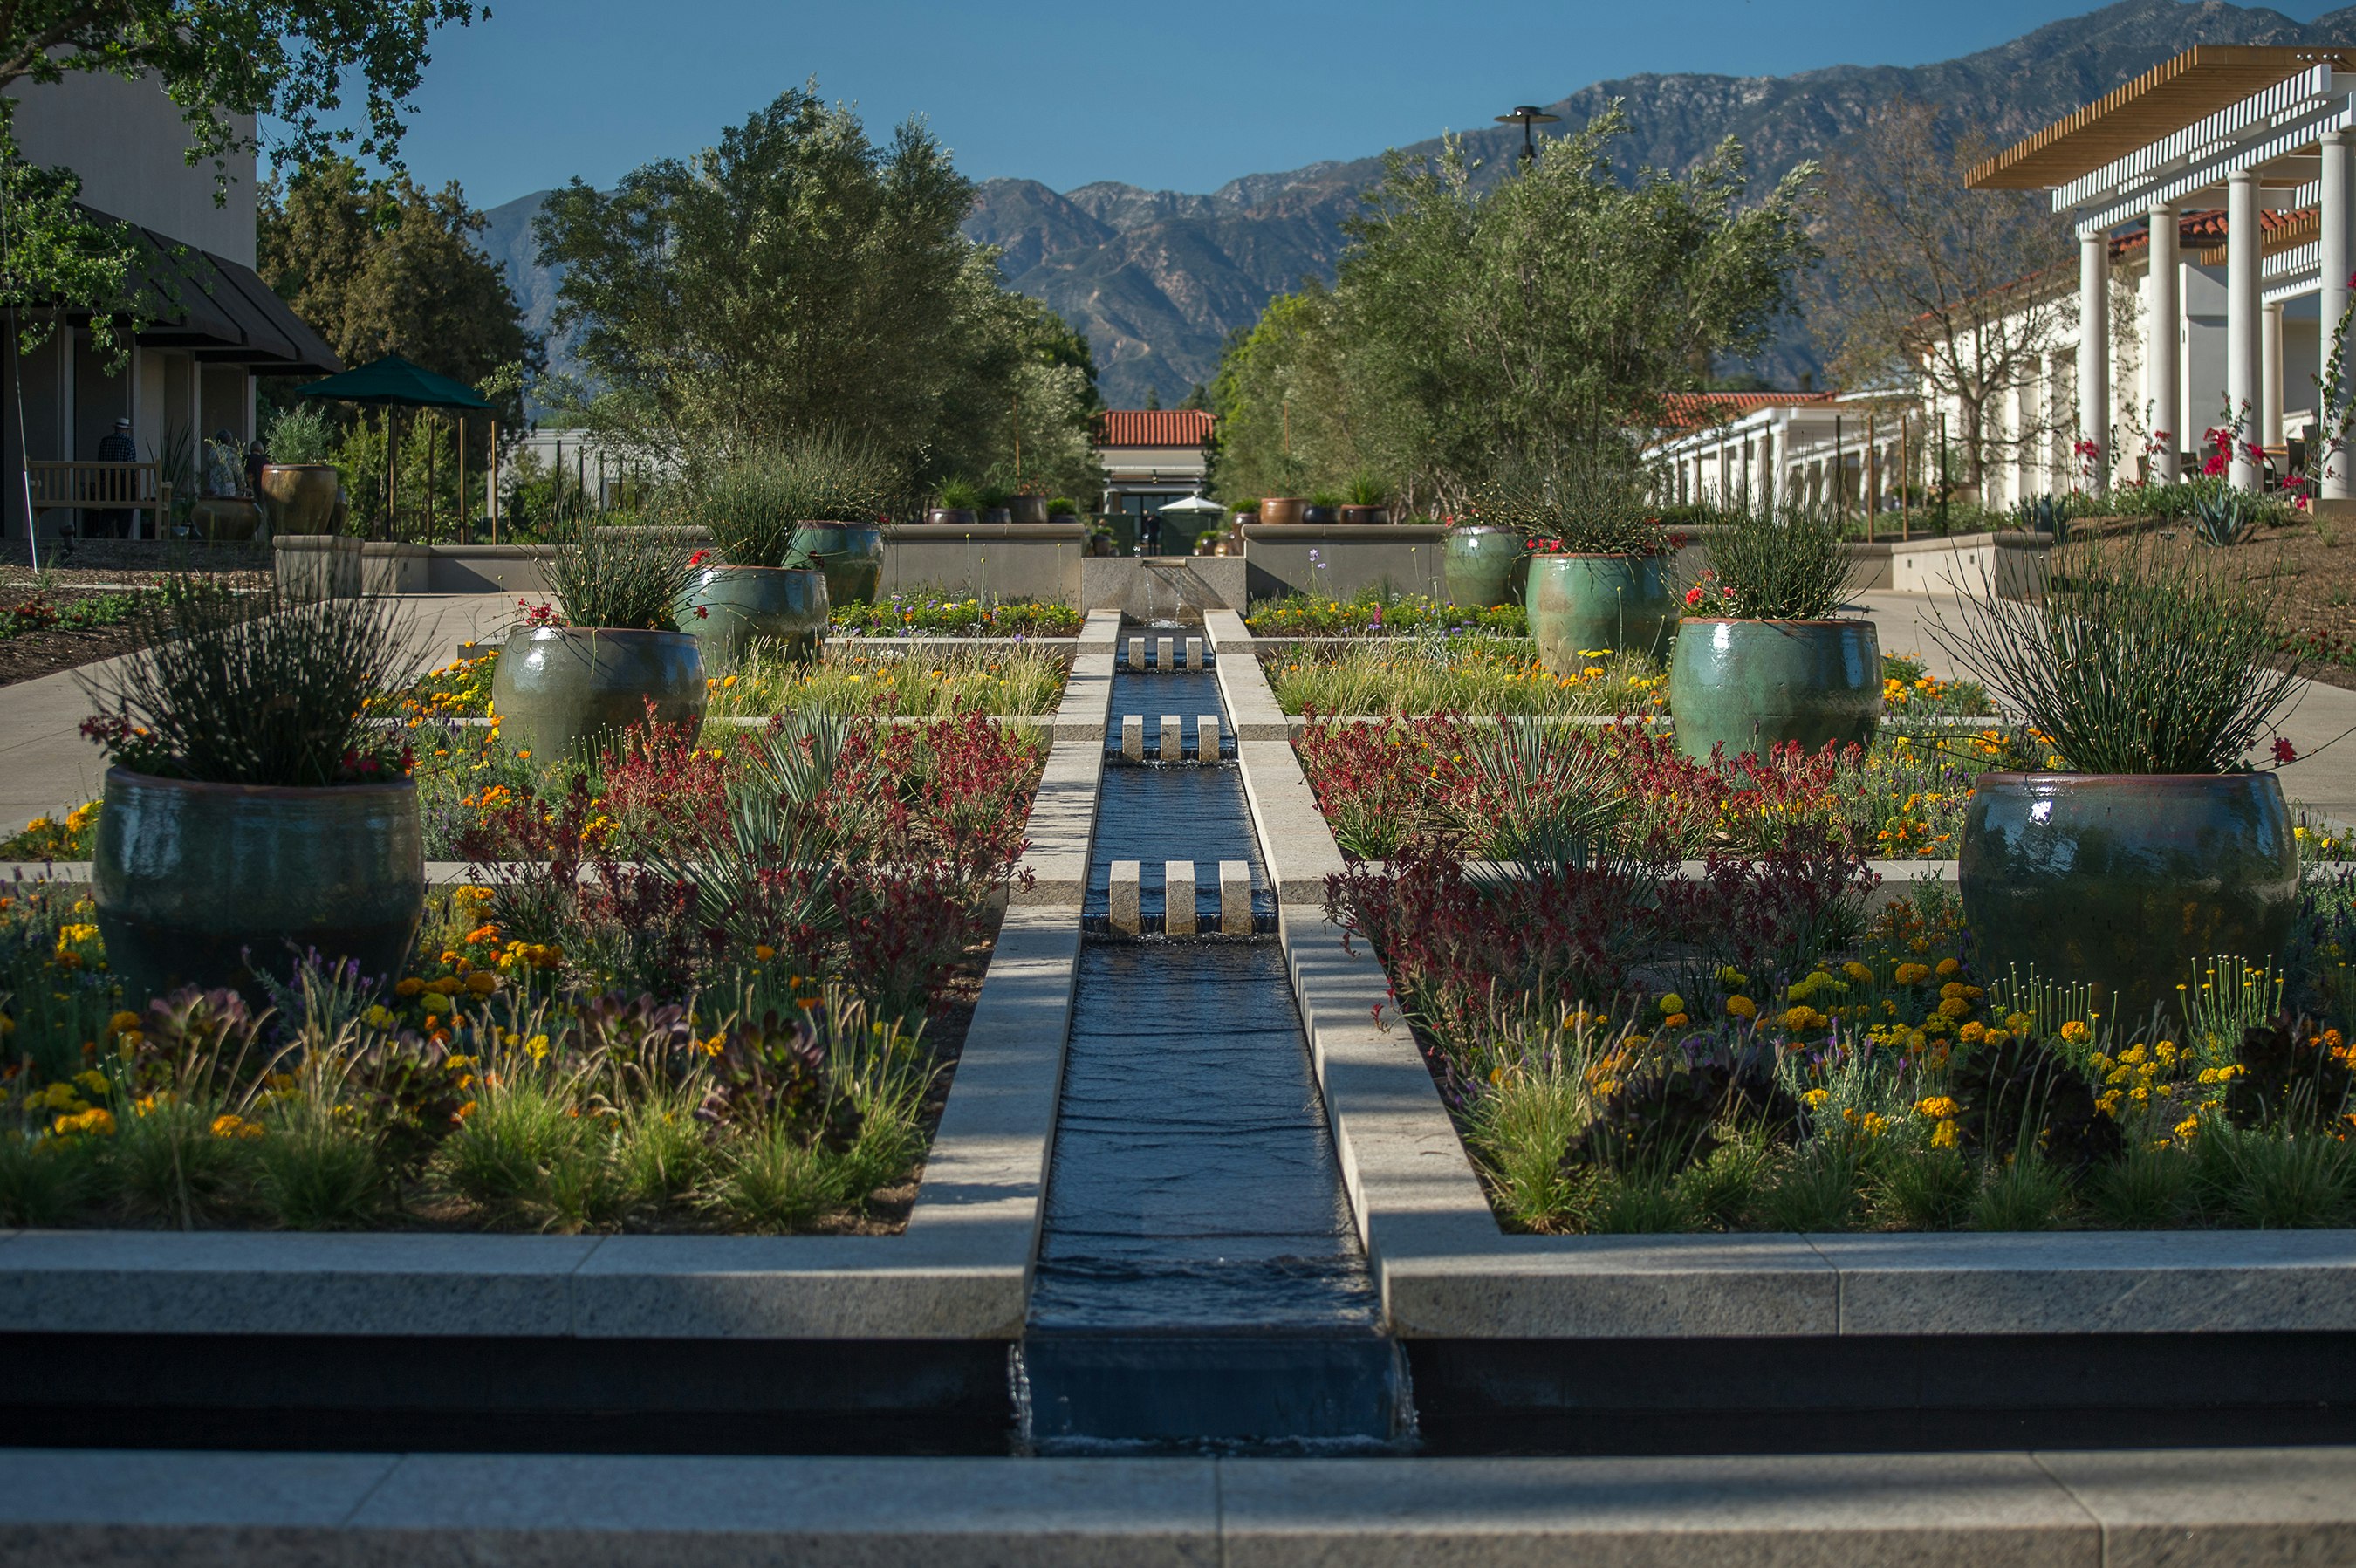 "The Huntington Library, Art Museum, and Botanical Gardens". Photo by Martha Benedict. ©The Huntington Library, Art Museum, and Botanical Gardens.